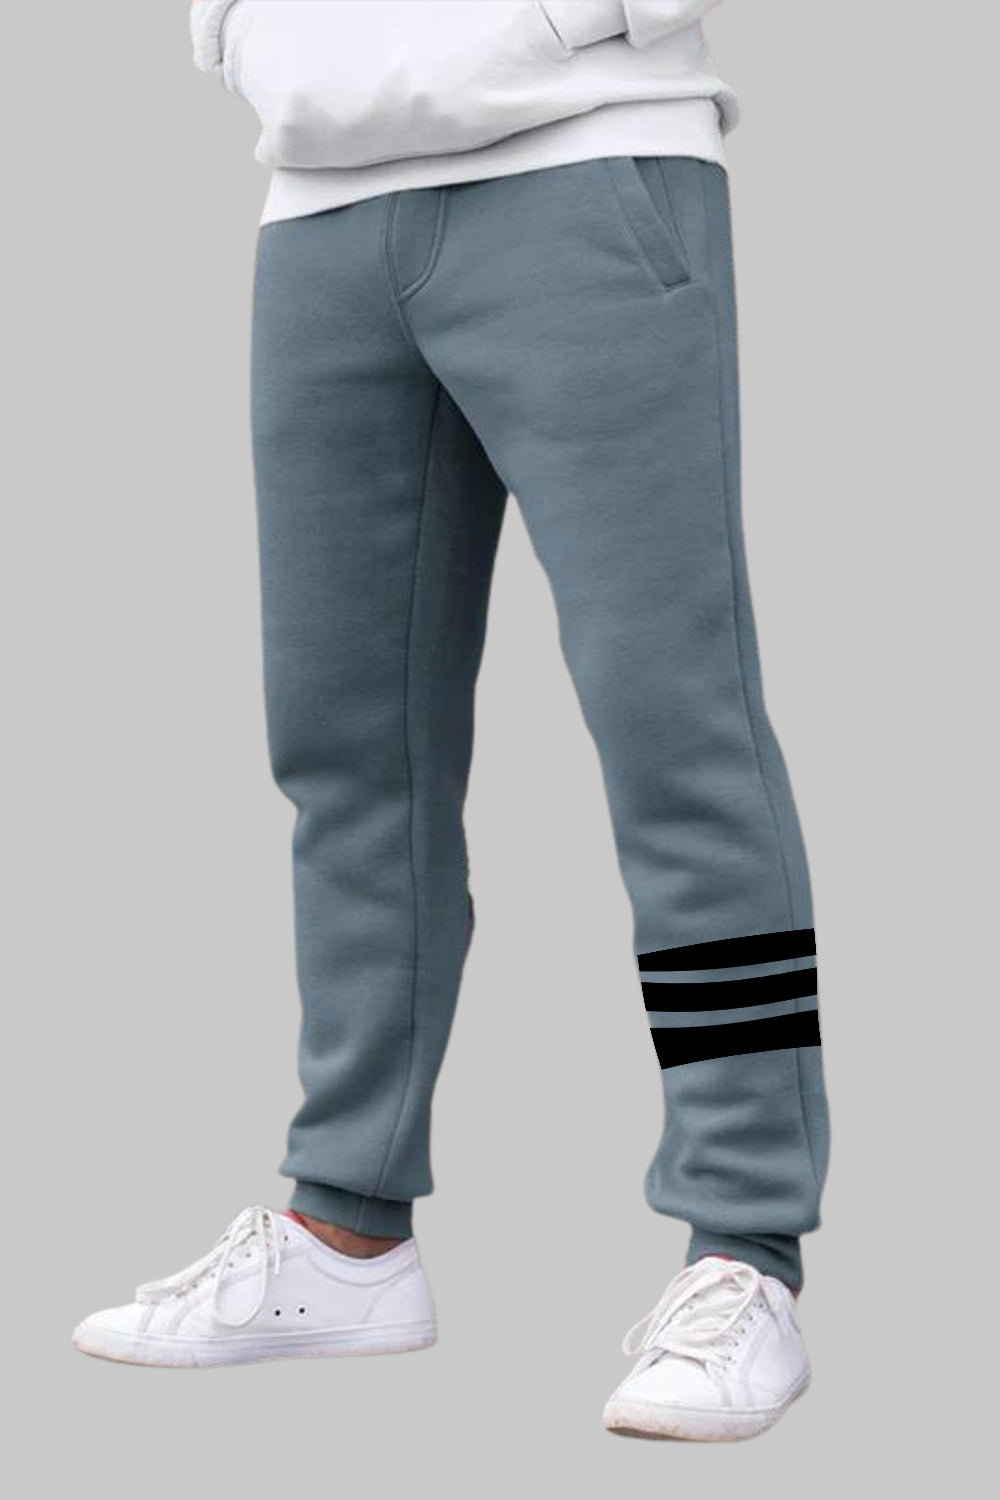 Ankle Stripes Graphic Printed Blue Grey Joggers